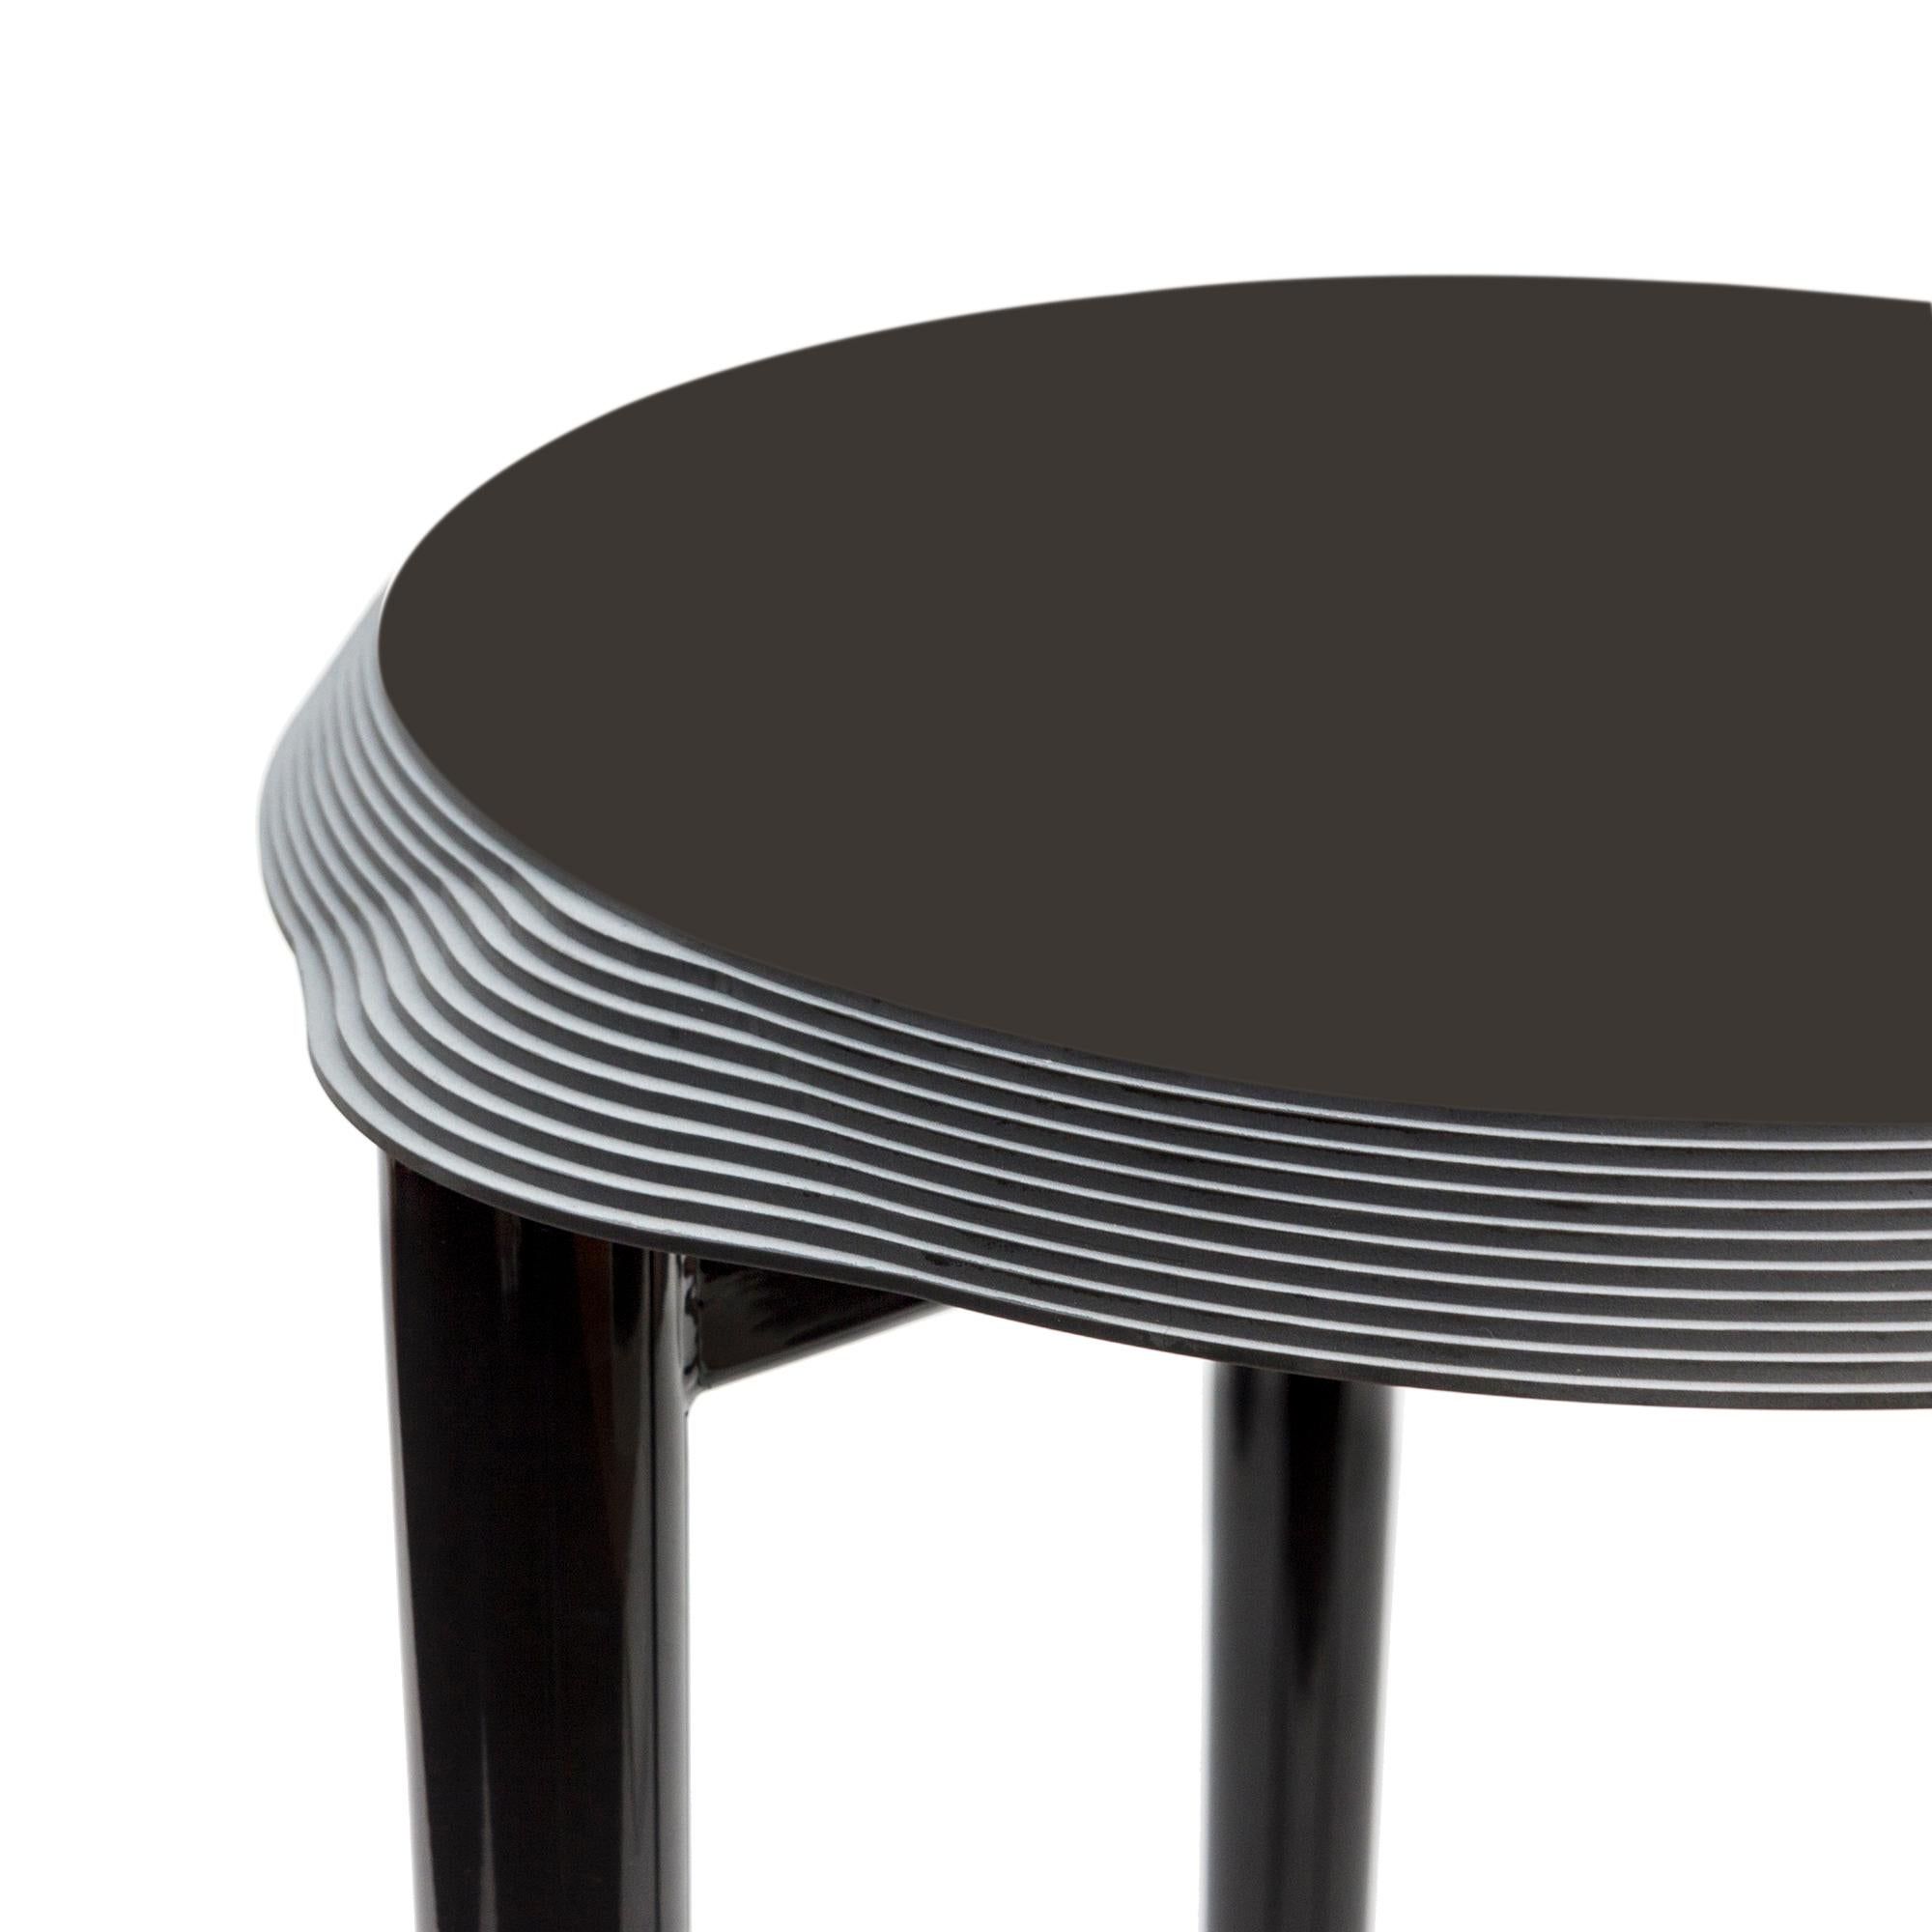 The ‘Jump’ stools are characterized by circular seats of Corian material, supported by three metal legs.
The circular seats are worked with slight differences of thickness that gradually increase and follow the circularity of the legs.
The low